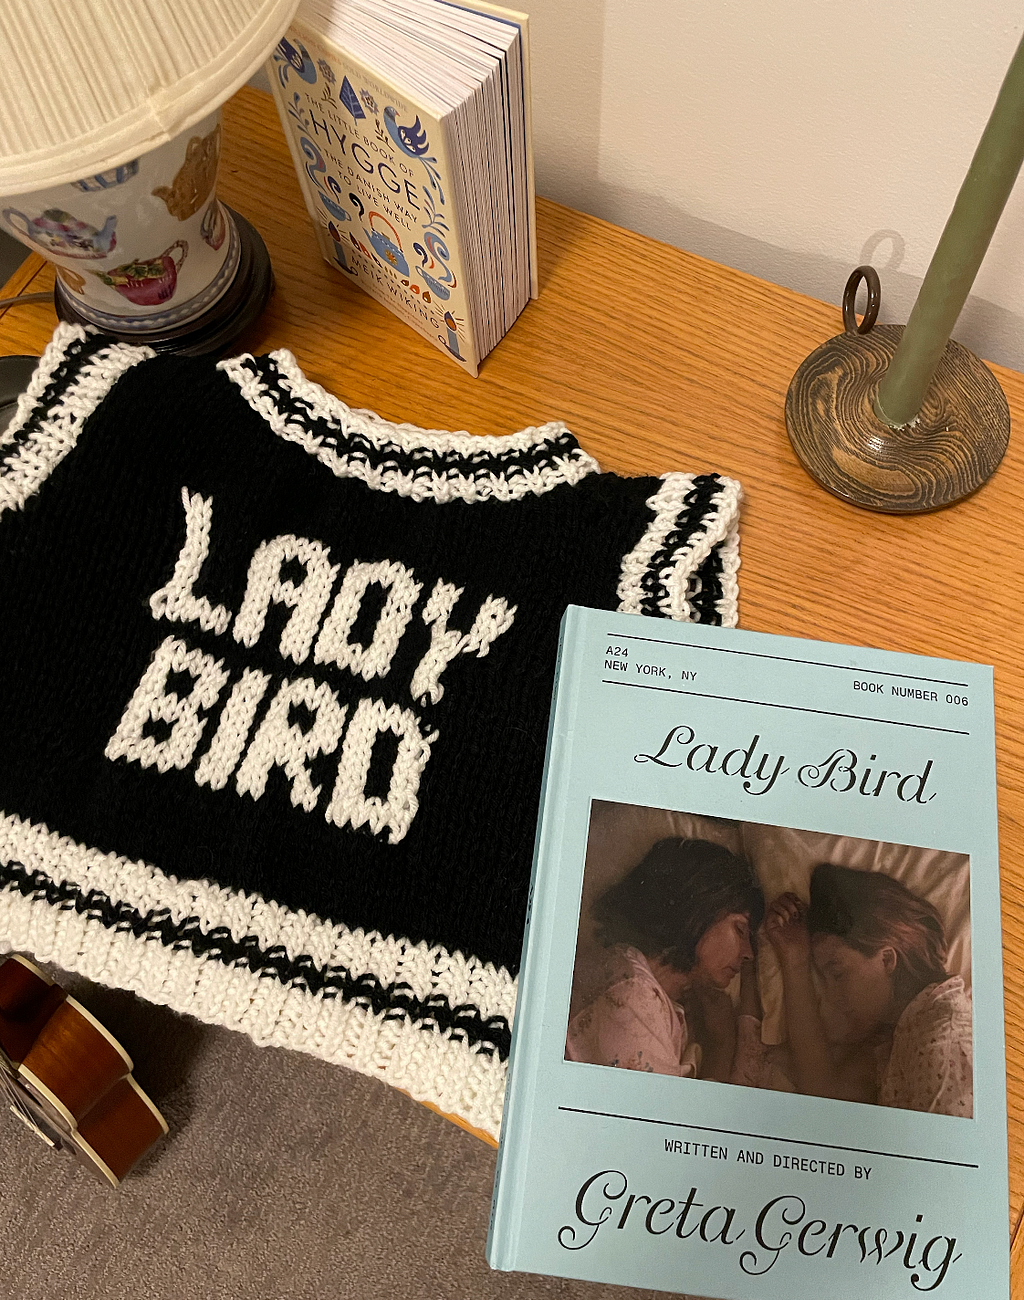 A black knitted vest with the words “Lady Bird” on it. Next to a printed version of the Lady Bird Script.